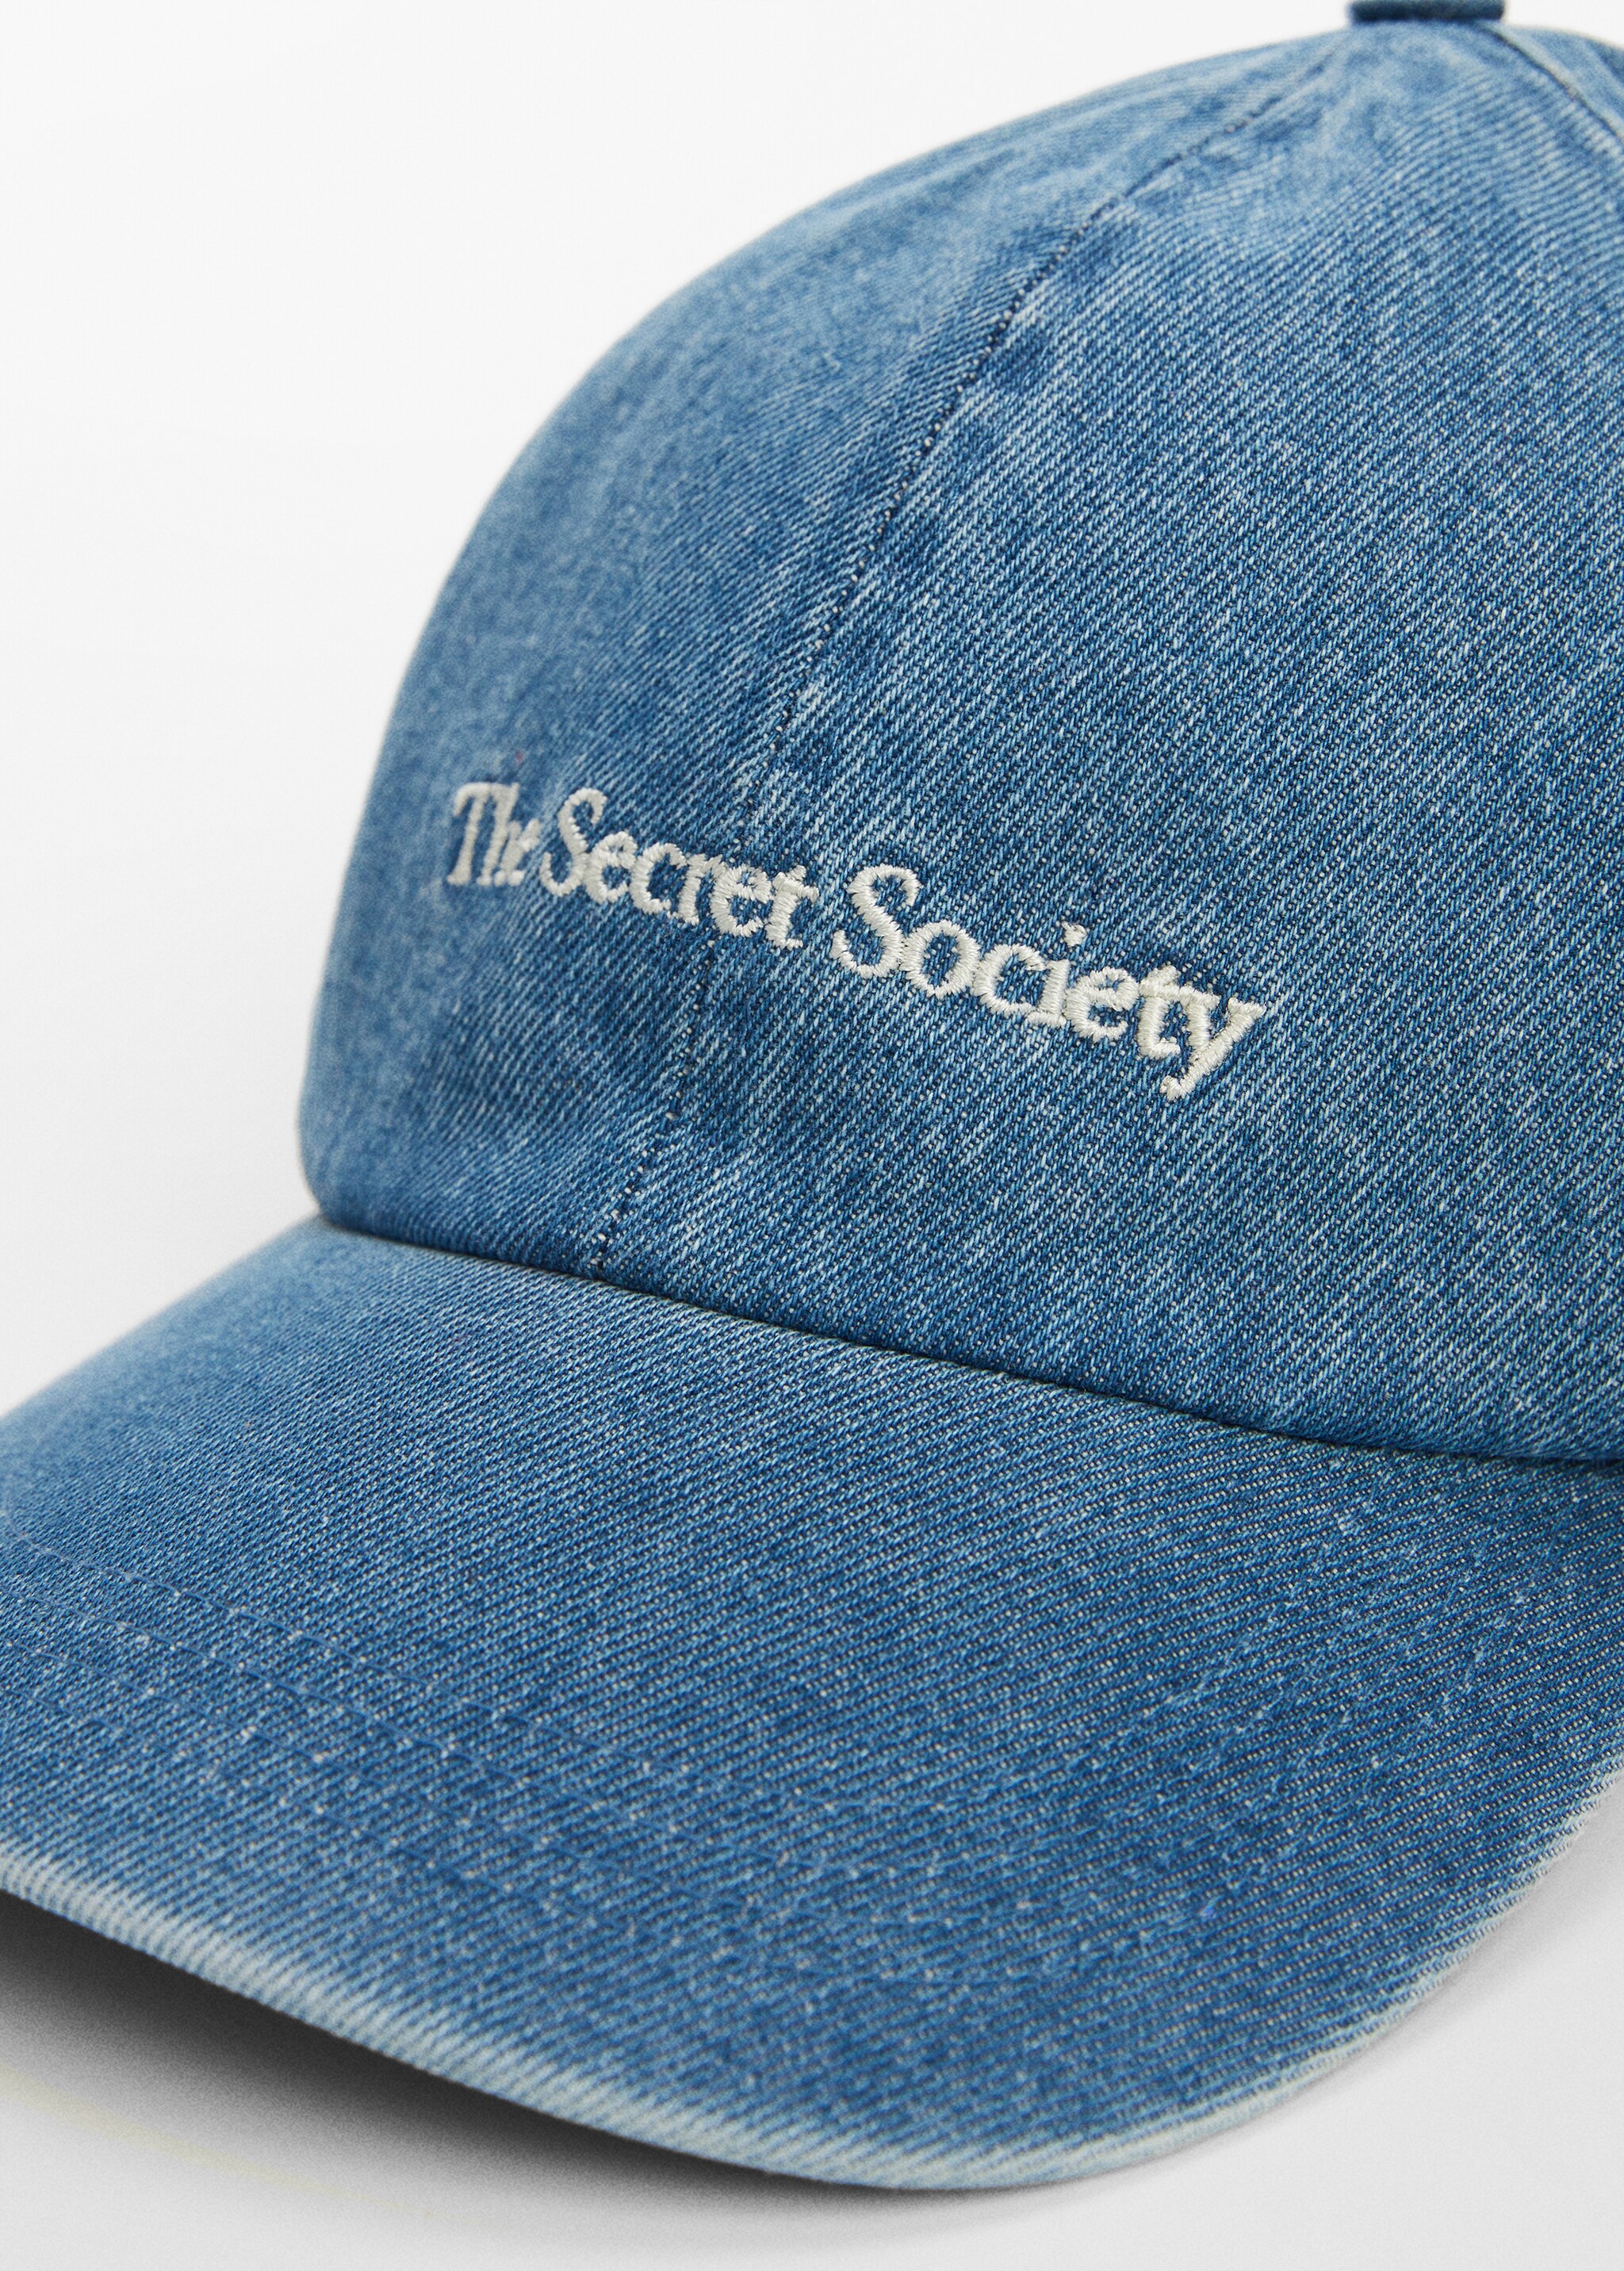 Denim cap with message - Details of the article 2